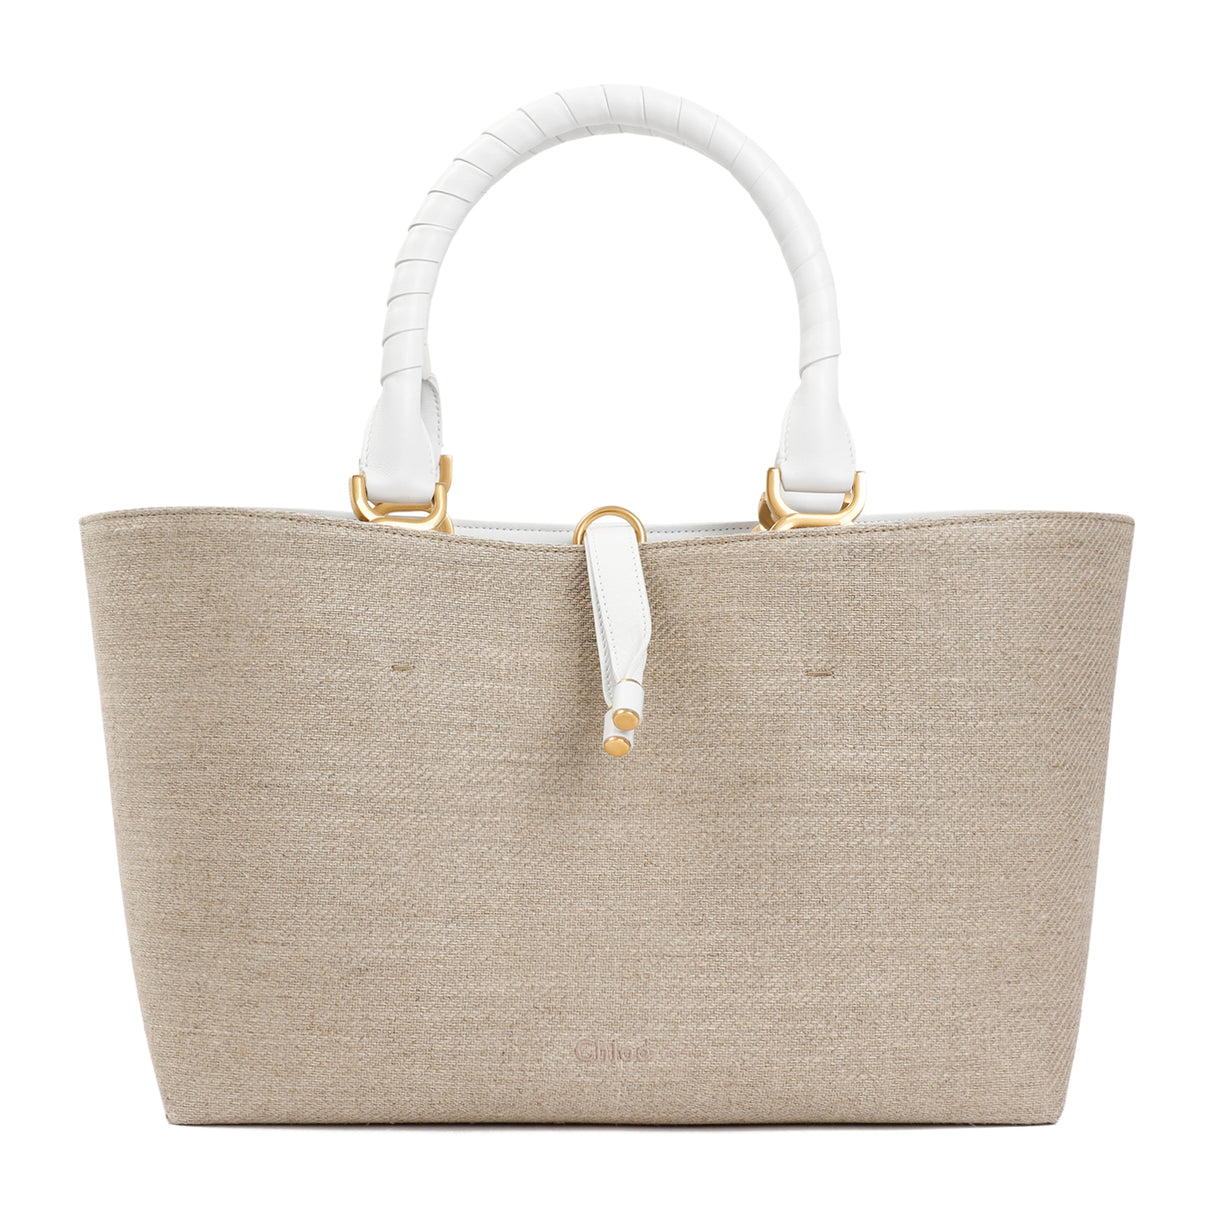 CHLOÉ Linen and Leather Tote Handbag for Women in Nude & Neutrals